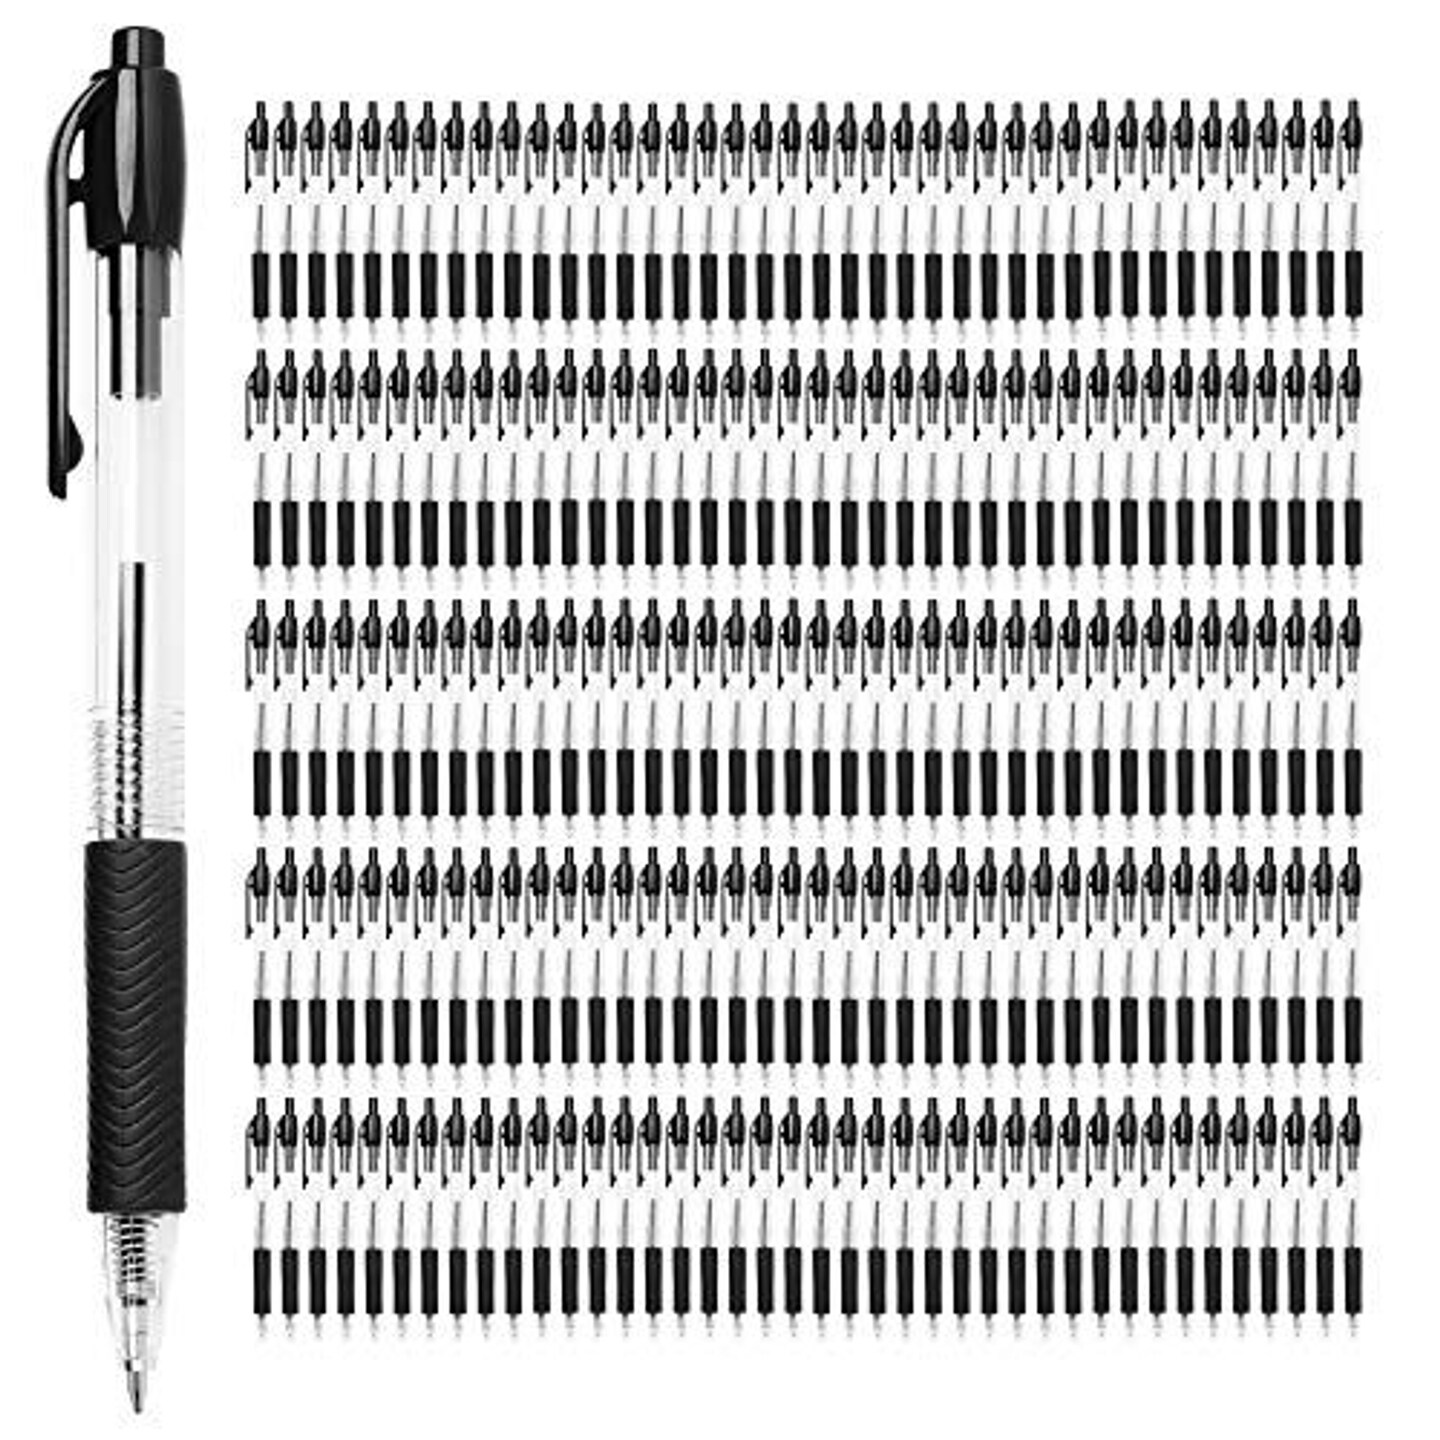 Simply Genius Ballpoint Pens in Bulk - 200 Pack Retractable Office Pens - Great for Schools, Notebooks, Journals &#x26; More - Comfort Grip &#x26; Smooth Writing Medium Point Pens (200pcs, Black Ink)